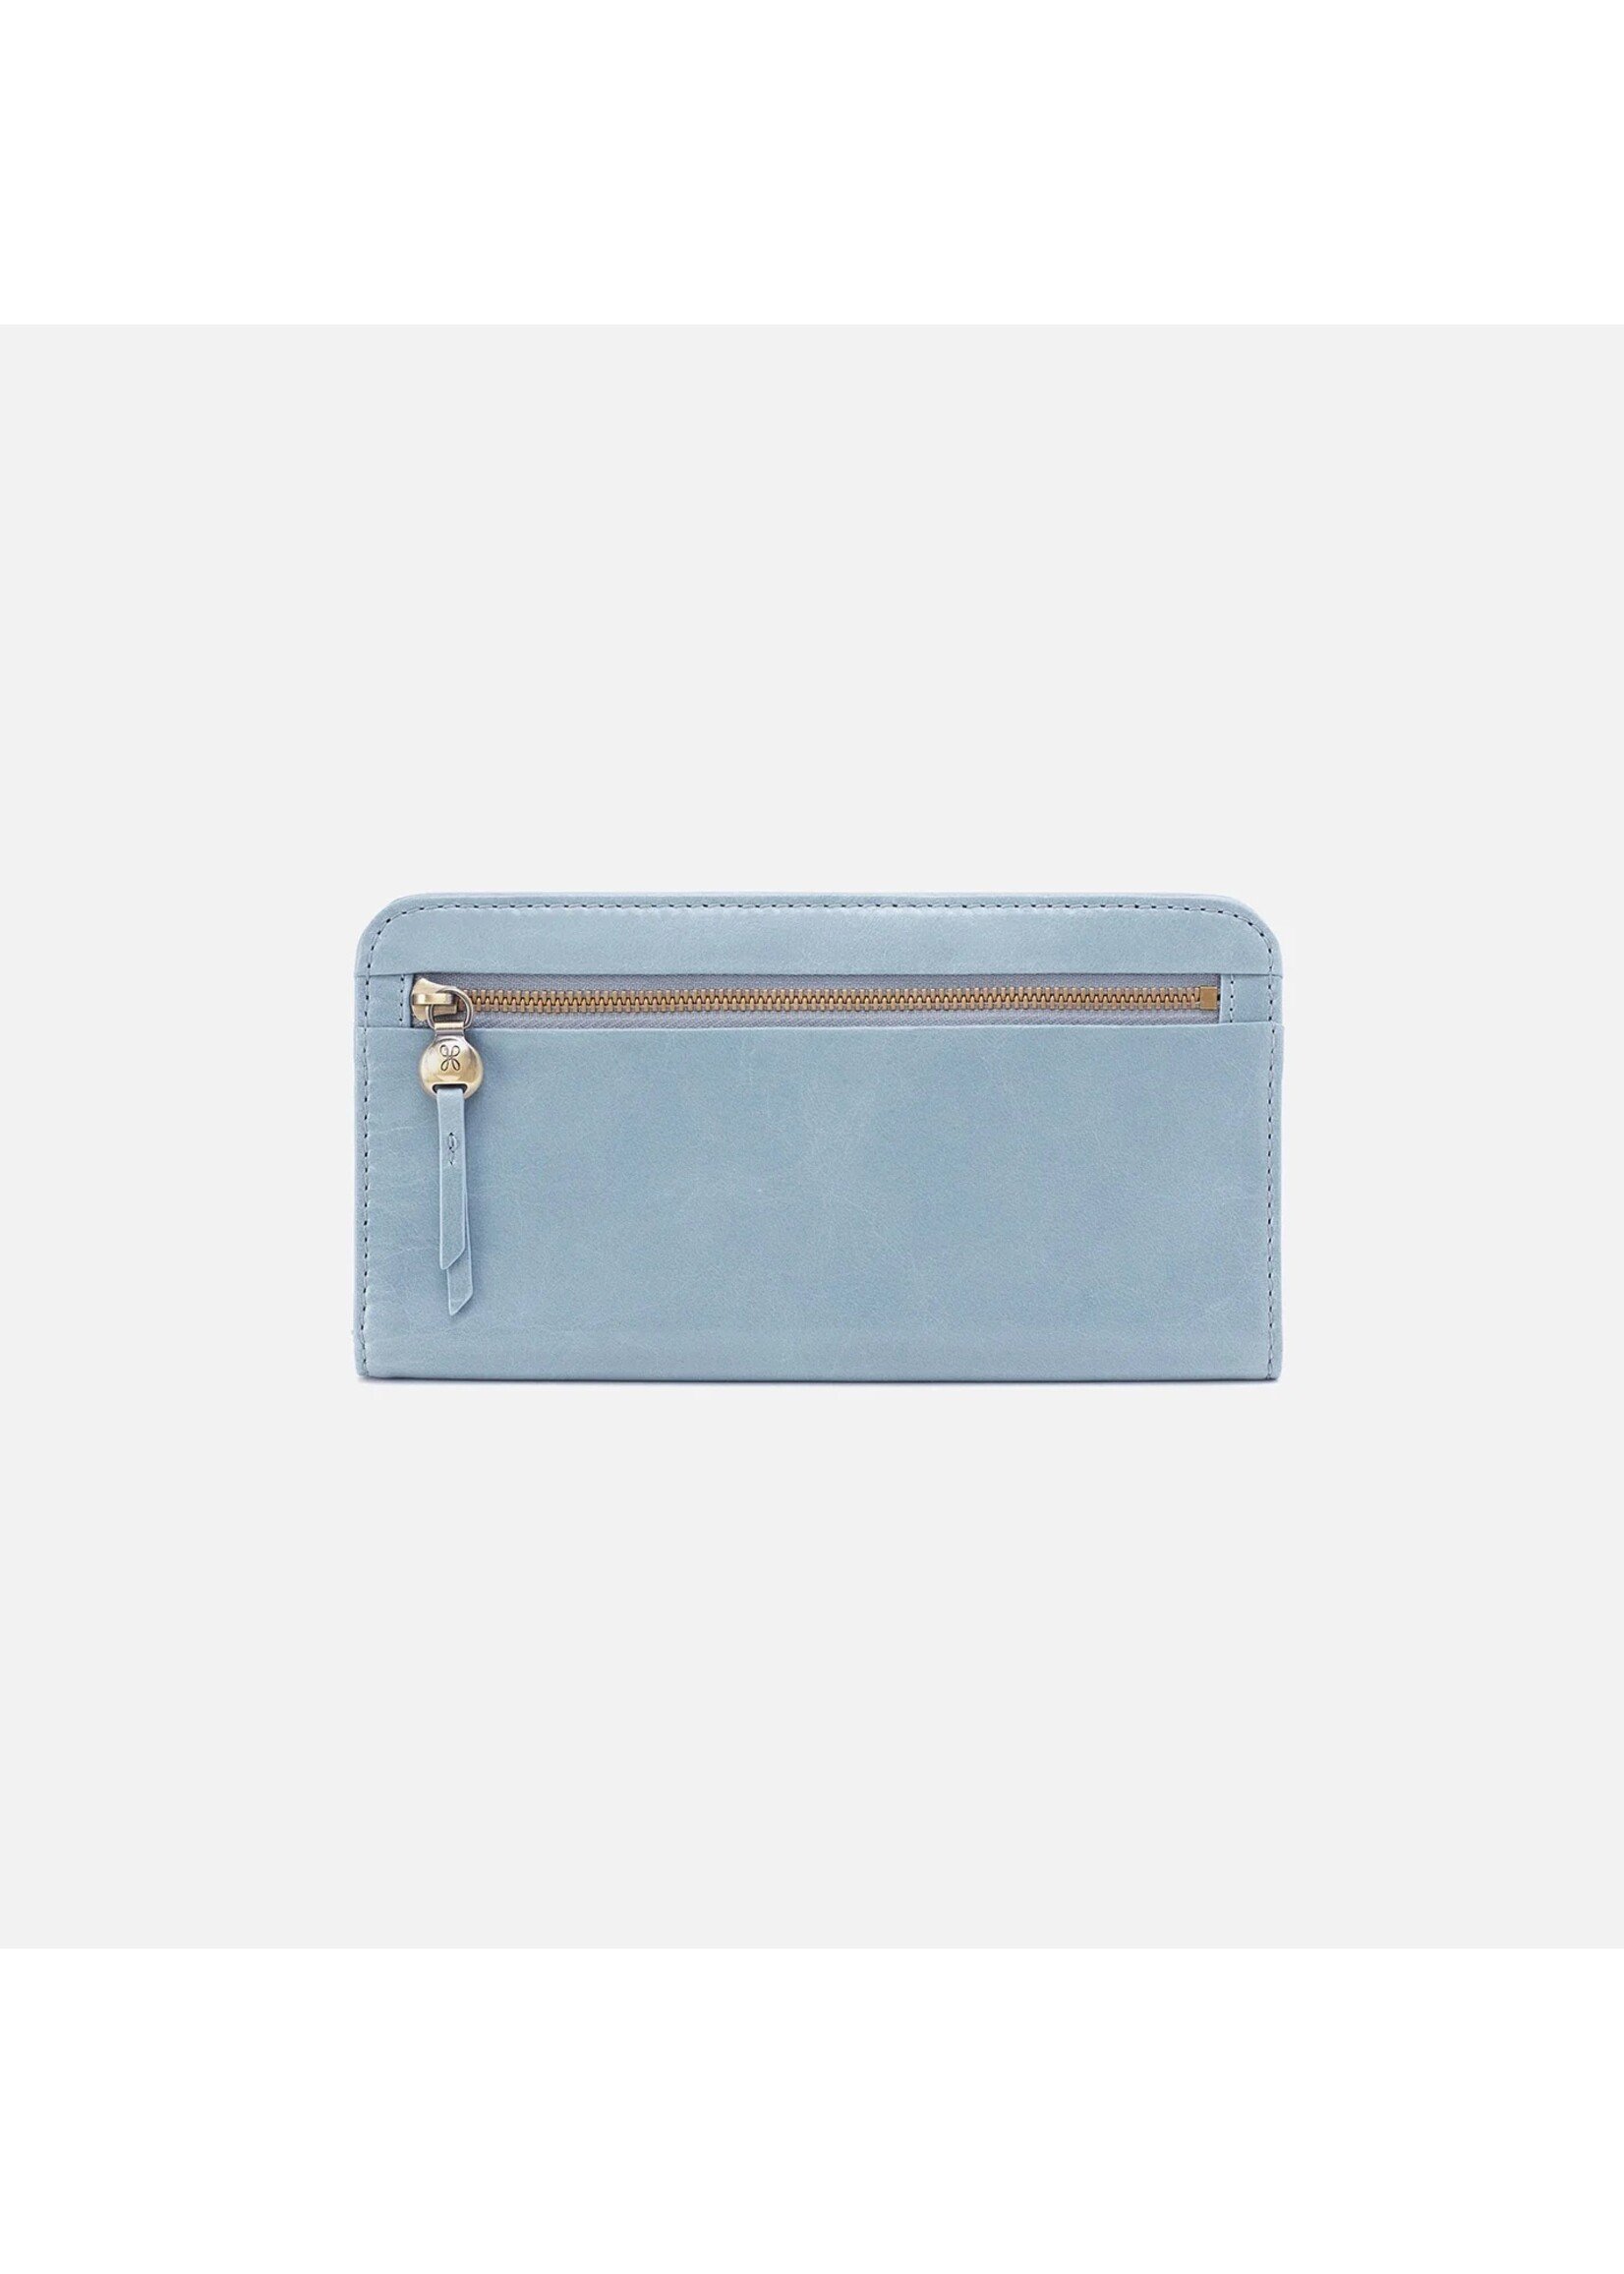 hobo Angle Continental Wallet - Cornflower